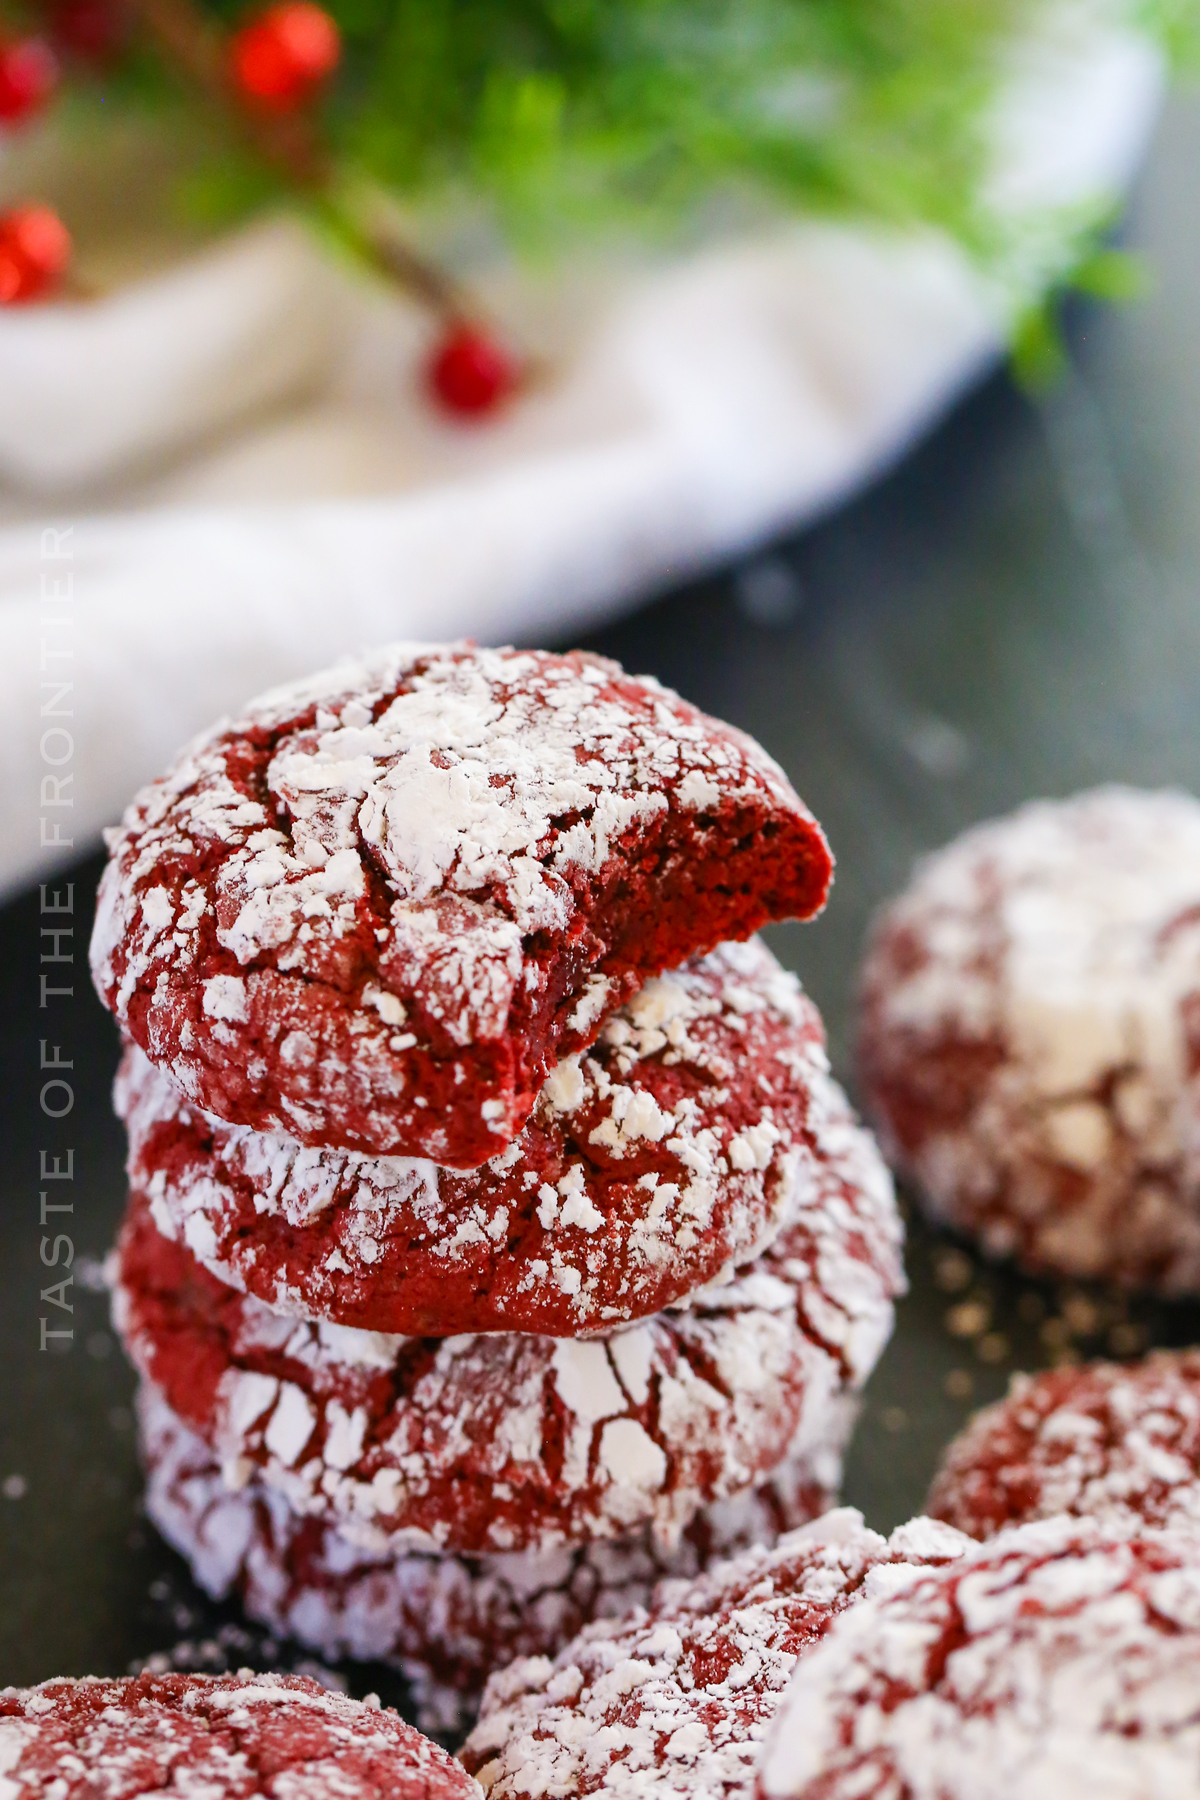 red velvet cookies made with cake mix